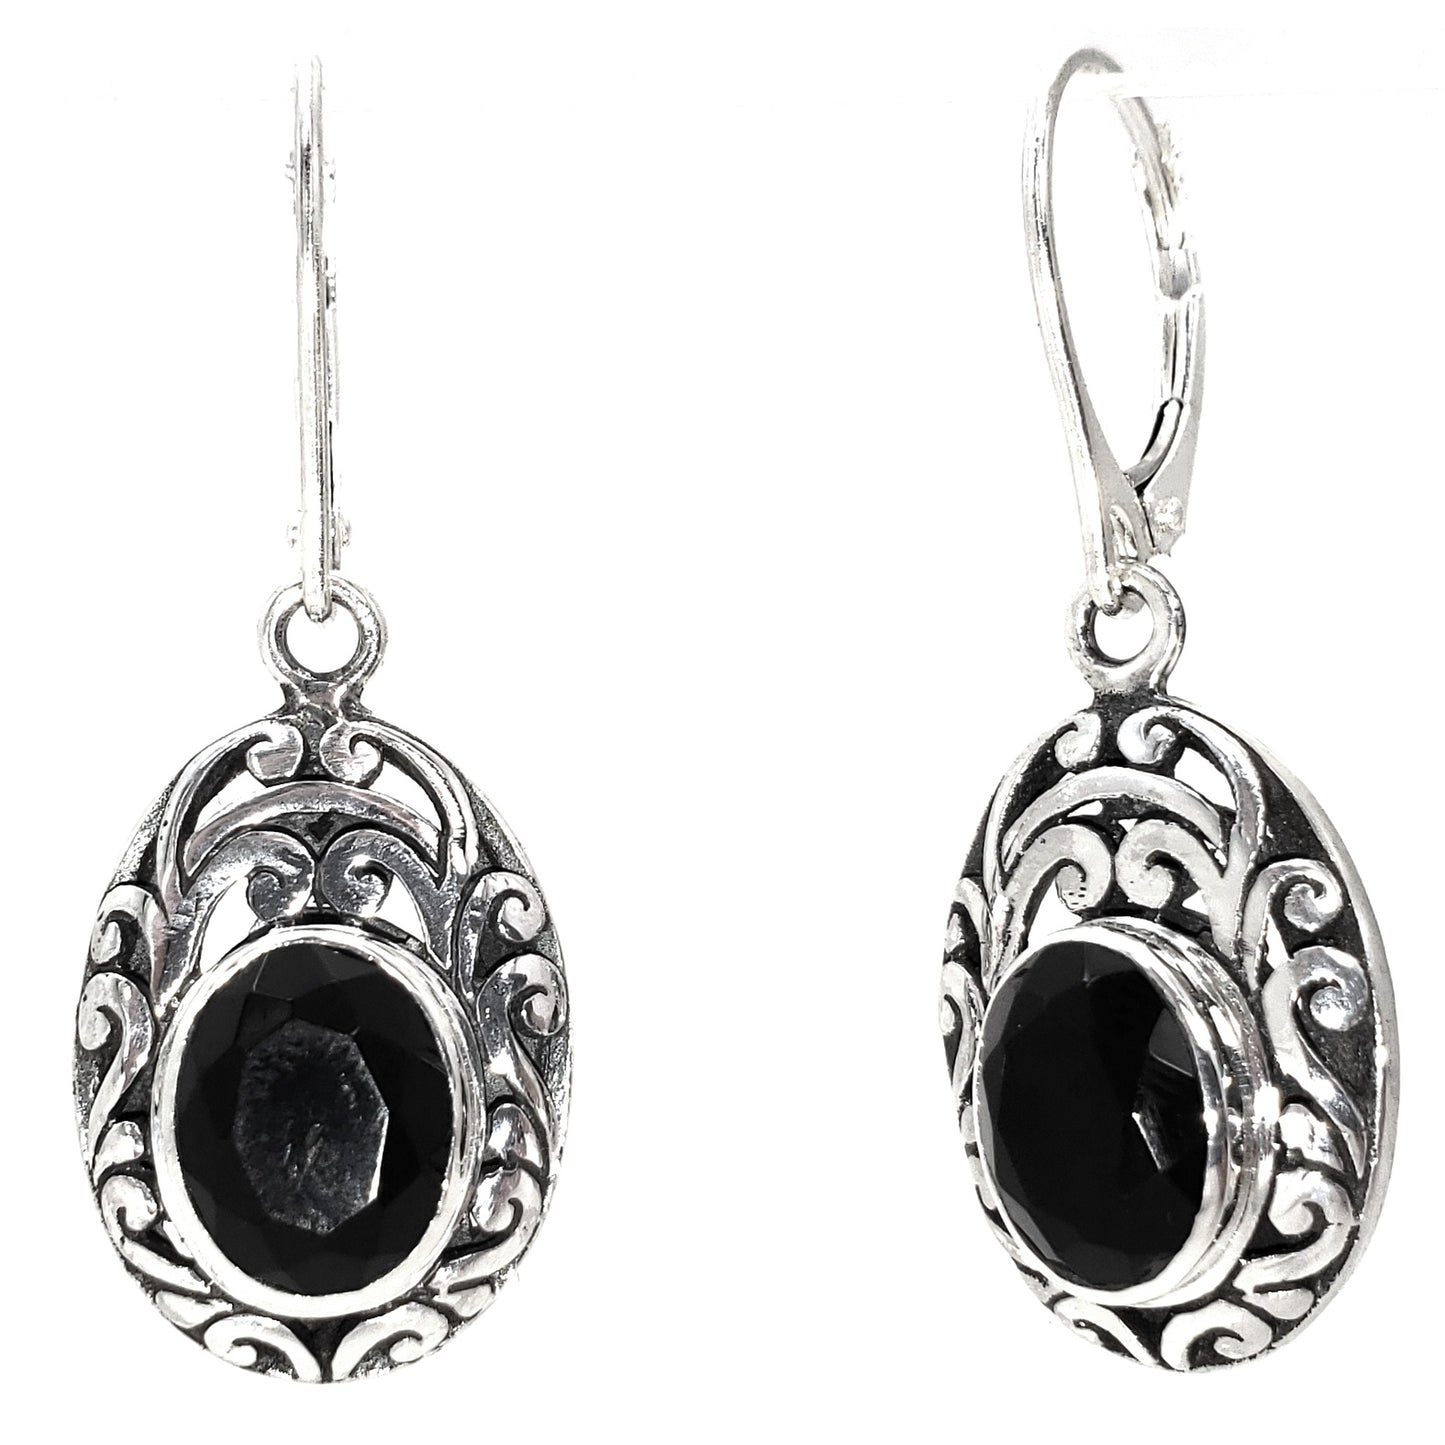 E711BOF MODA .925 Sterling Silver Carved Bali Earrings with Onyx